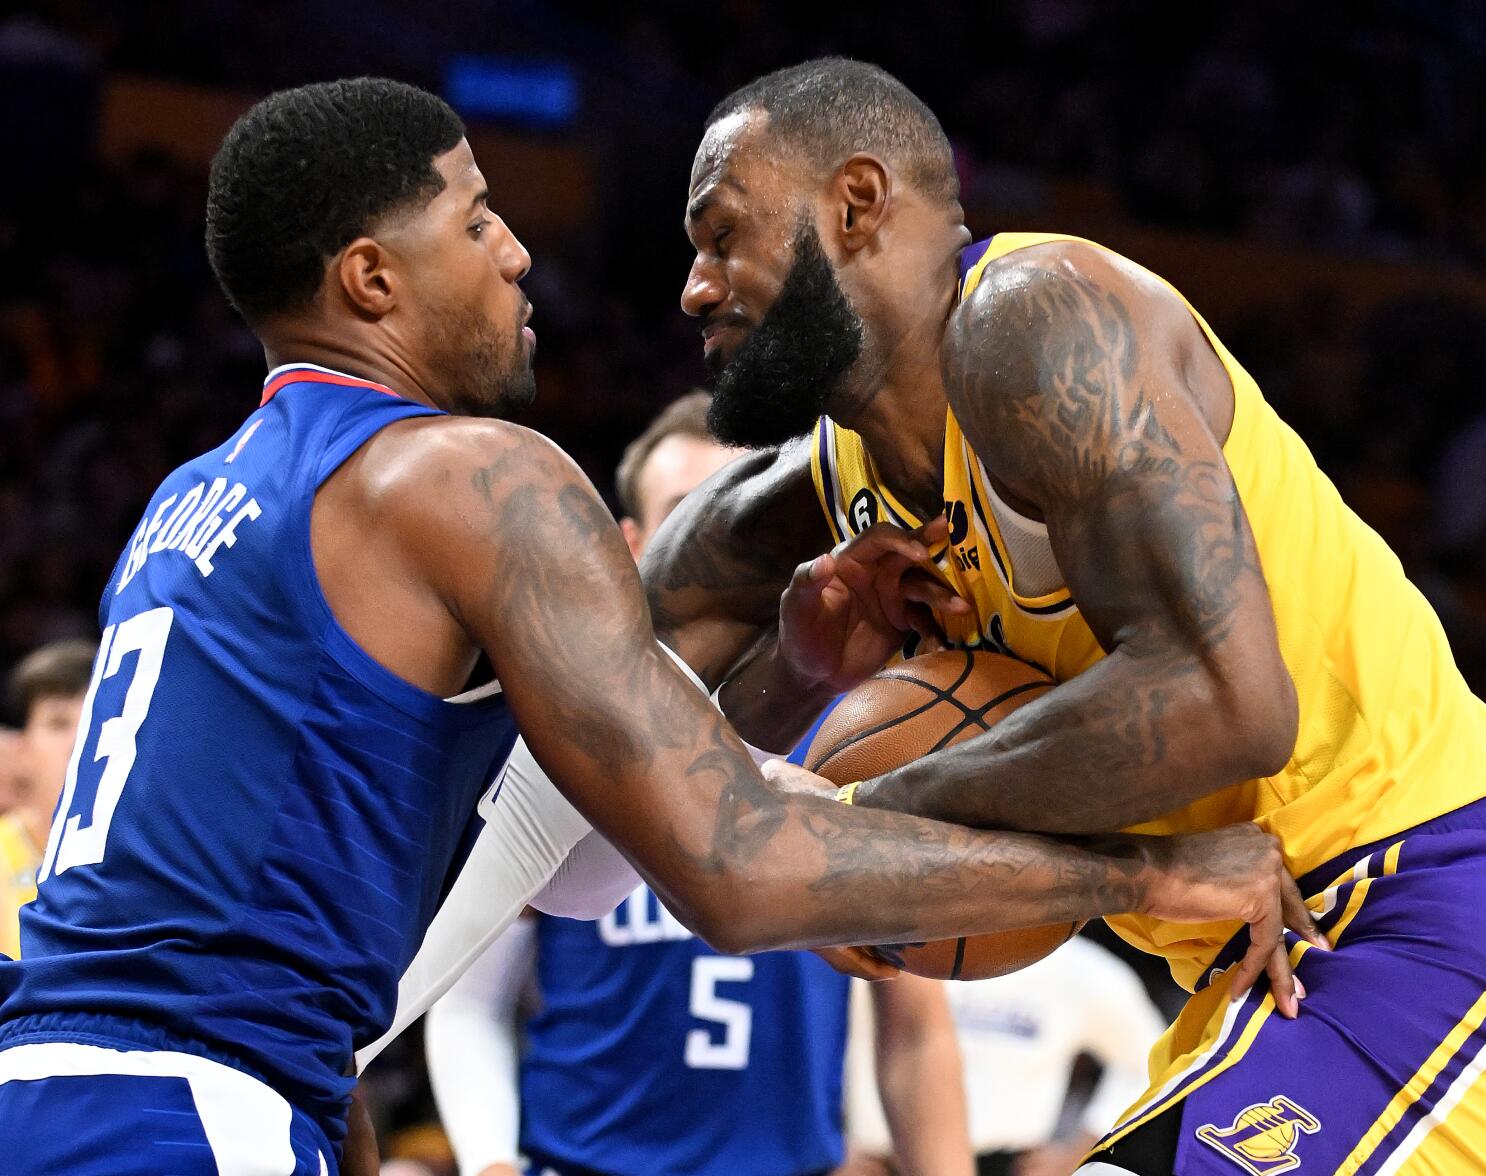 LA Clippers Paul George inspired by Lakers LeBron James' longevity